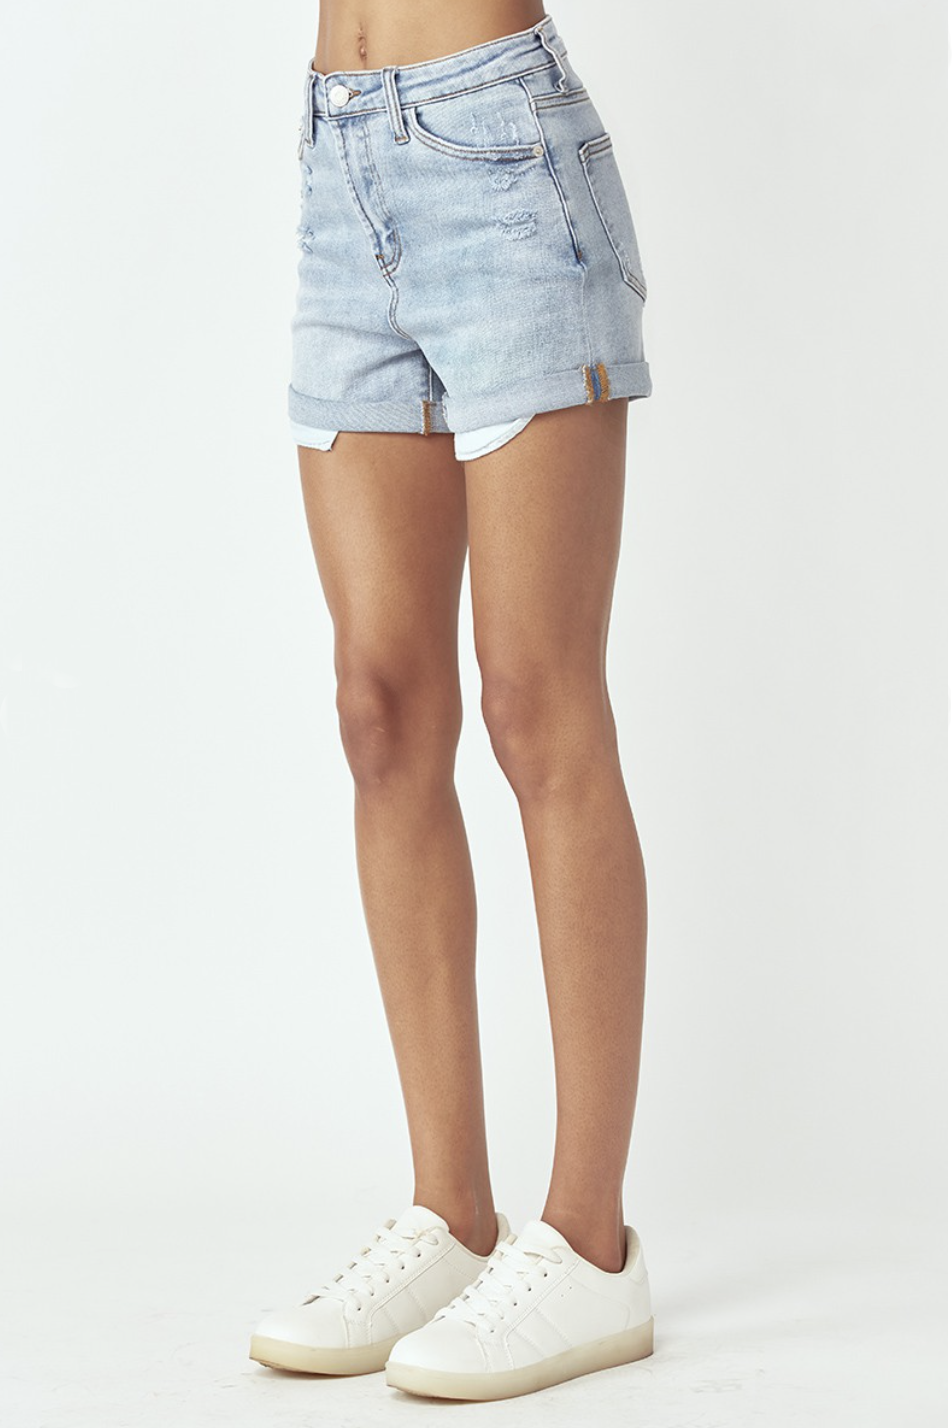 Load image into Gallery viewer, Glow Fashion Boutique Light Wash Distressed Denim Shorts
